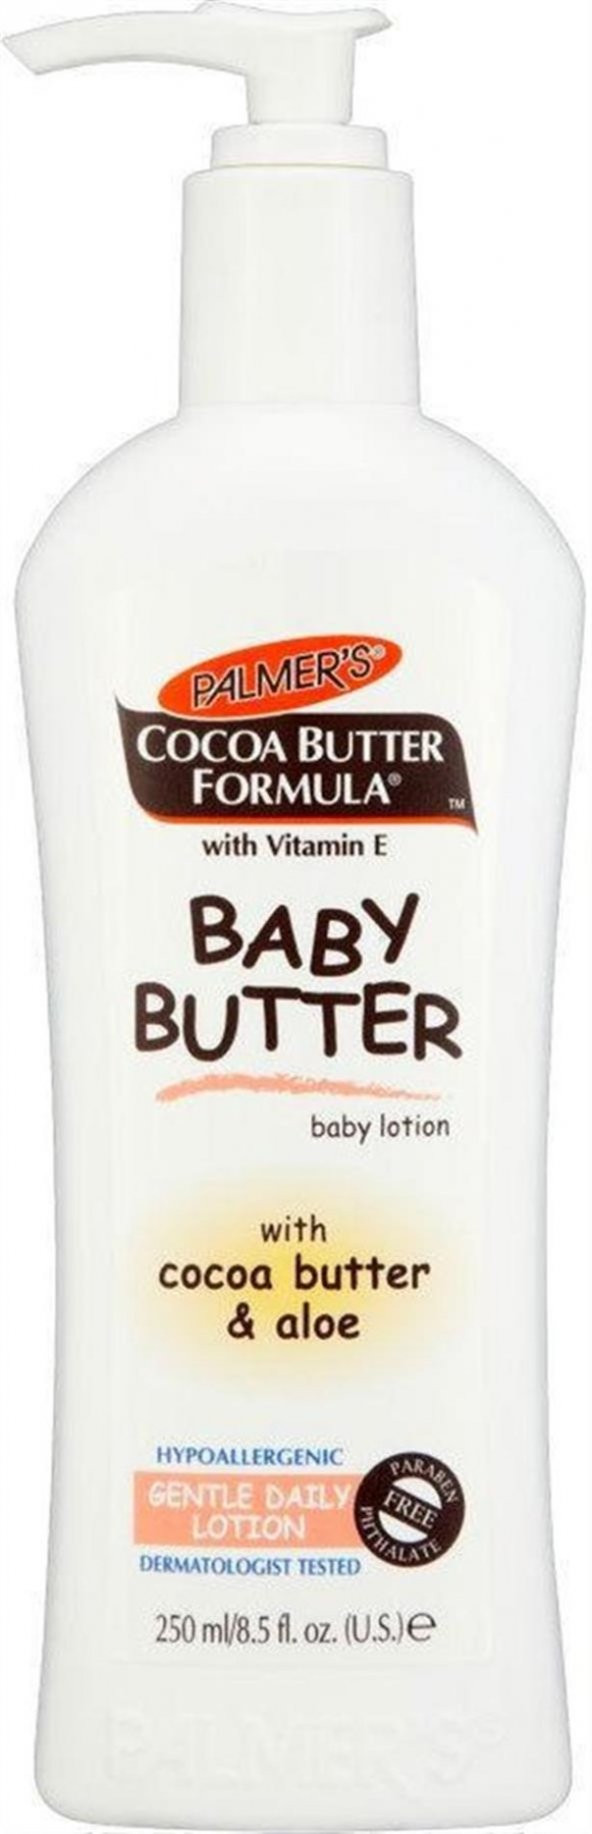 Palmers Baby Butter